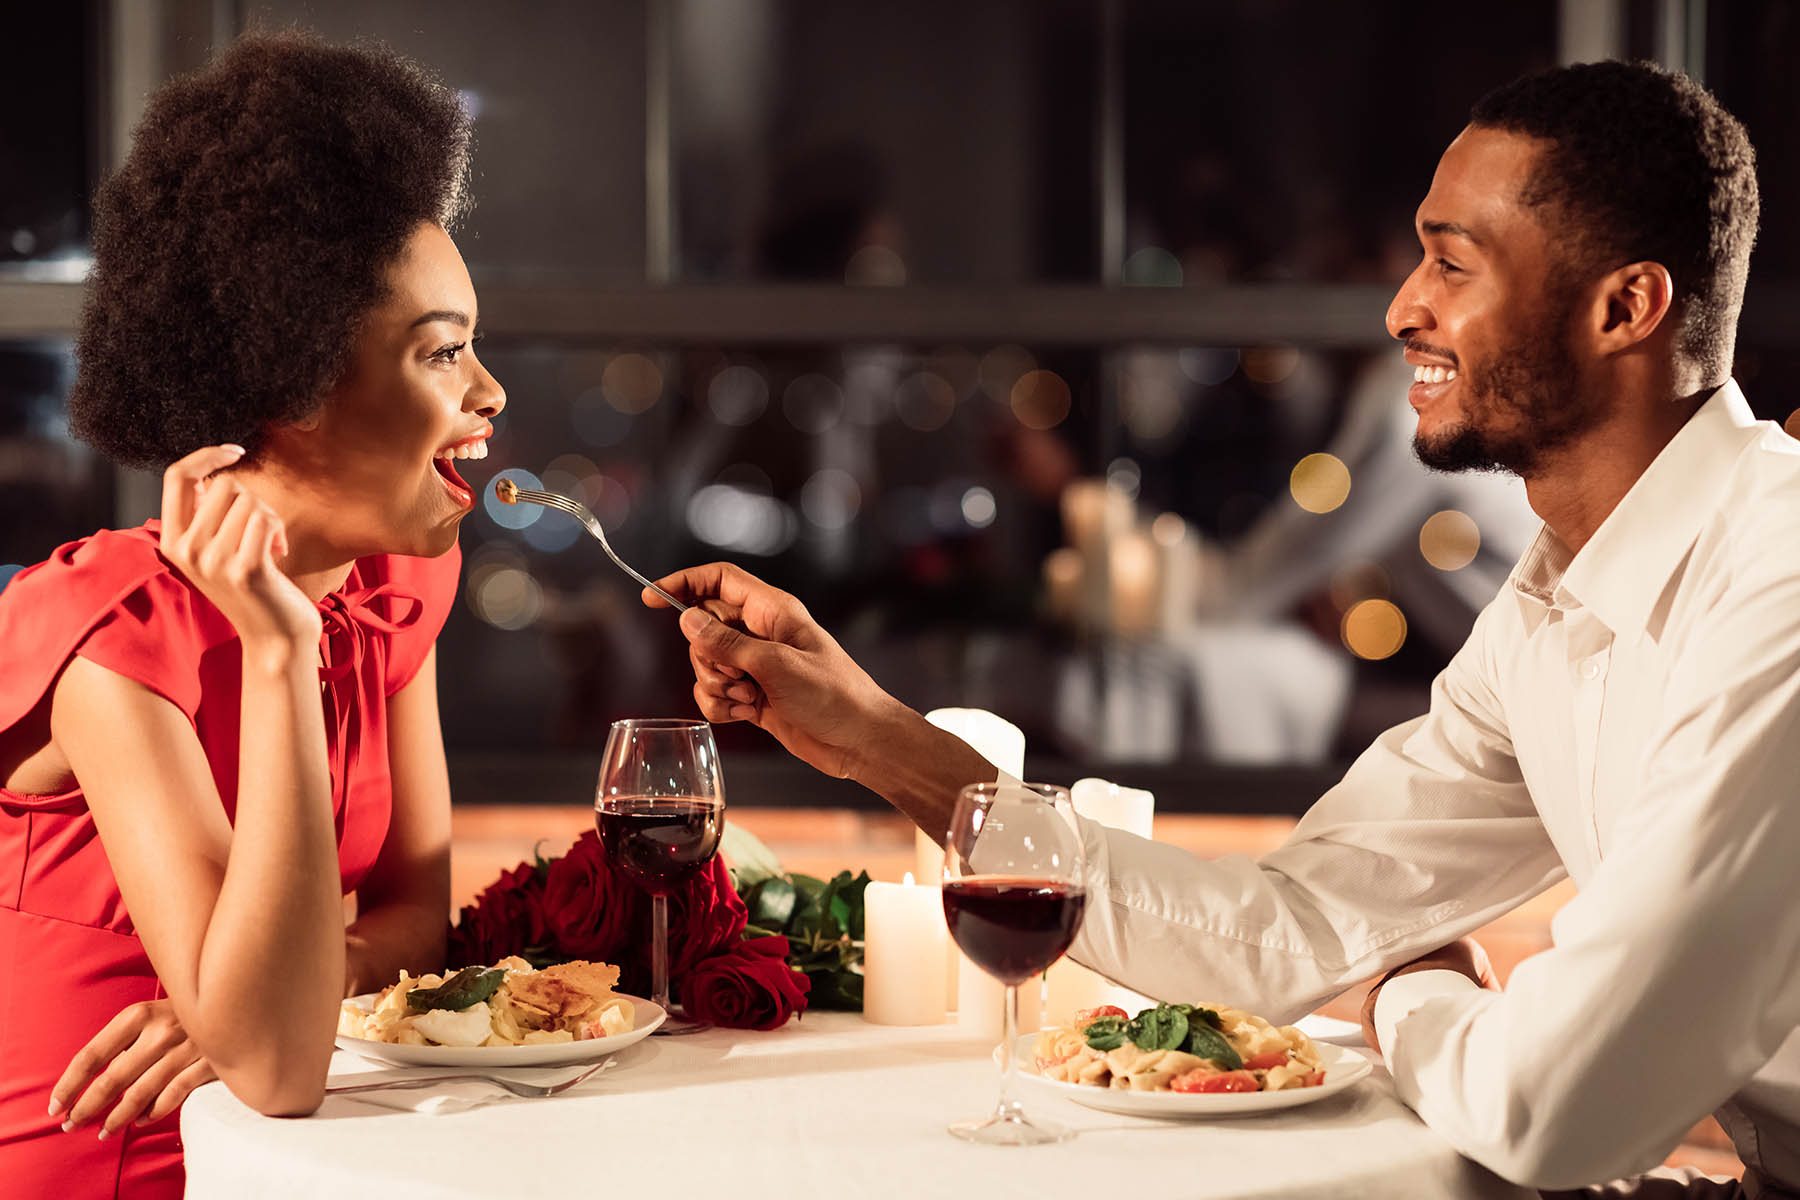 couple having a romantic dinner at a restaurant with the man holding a fork of food for his girlfriend to try